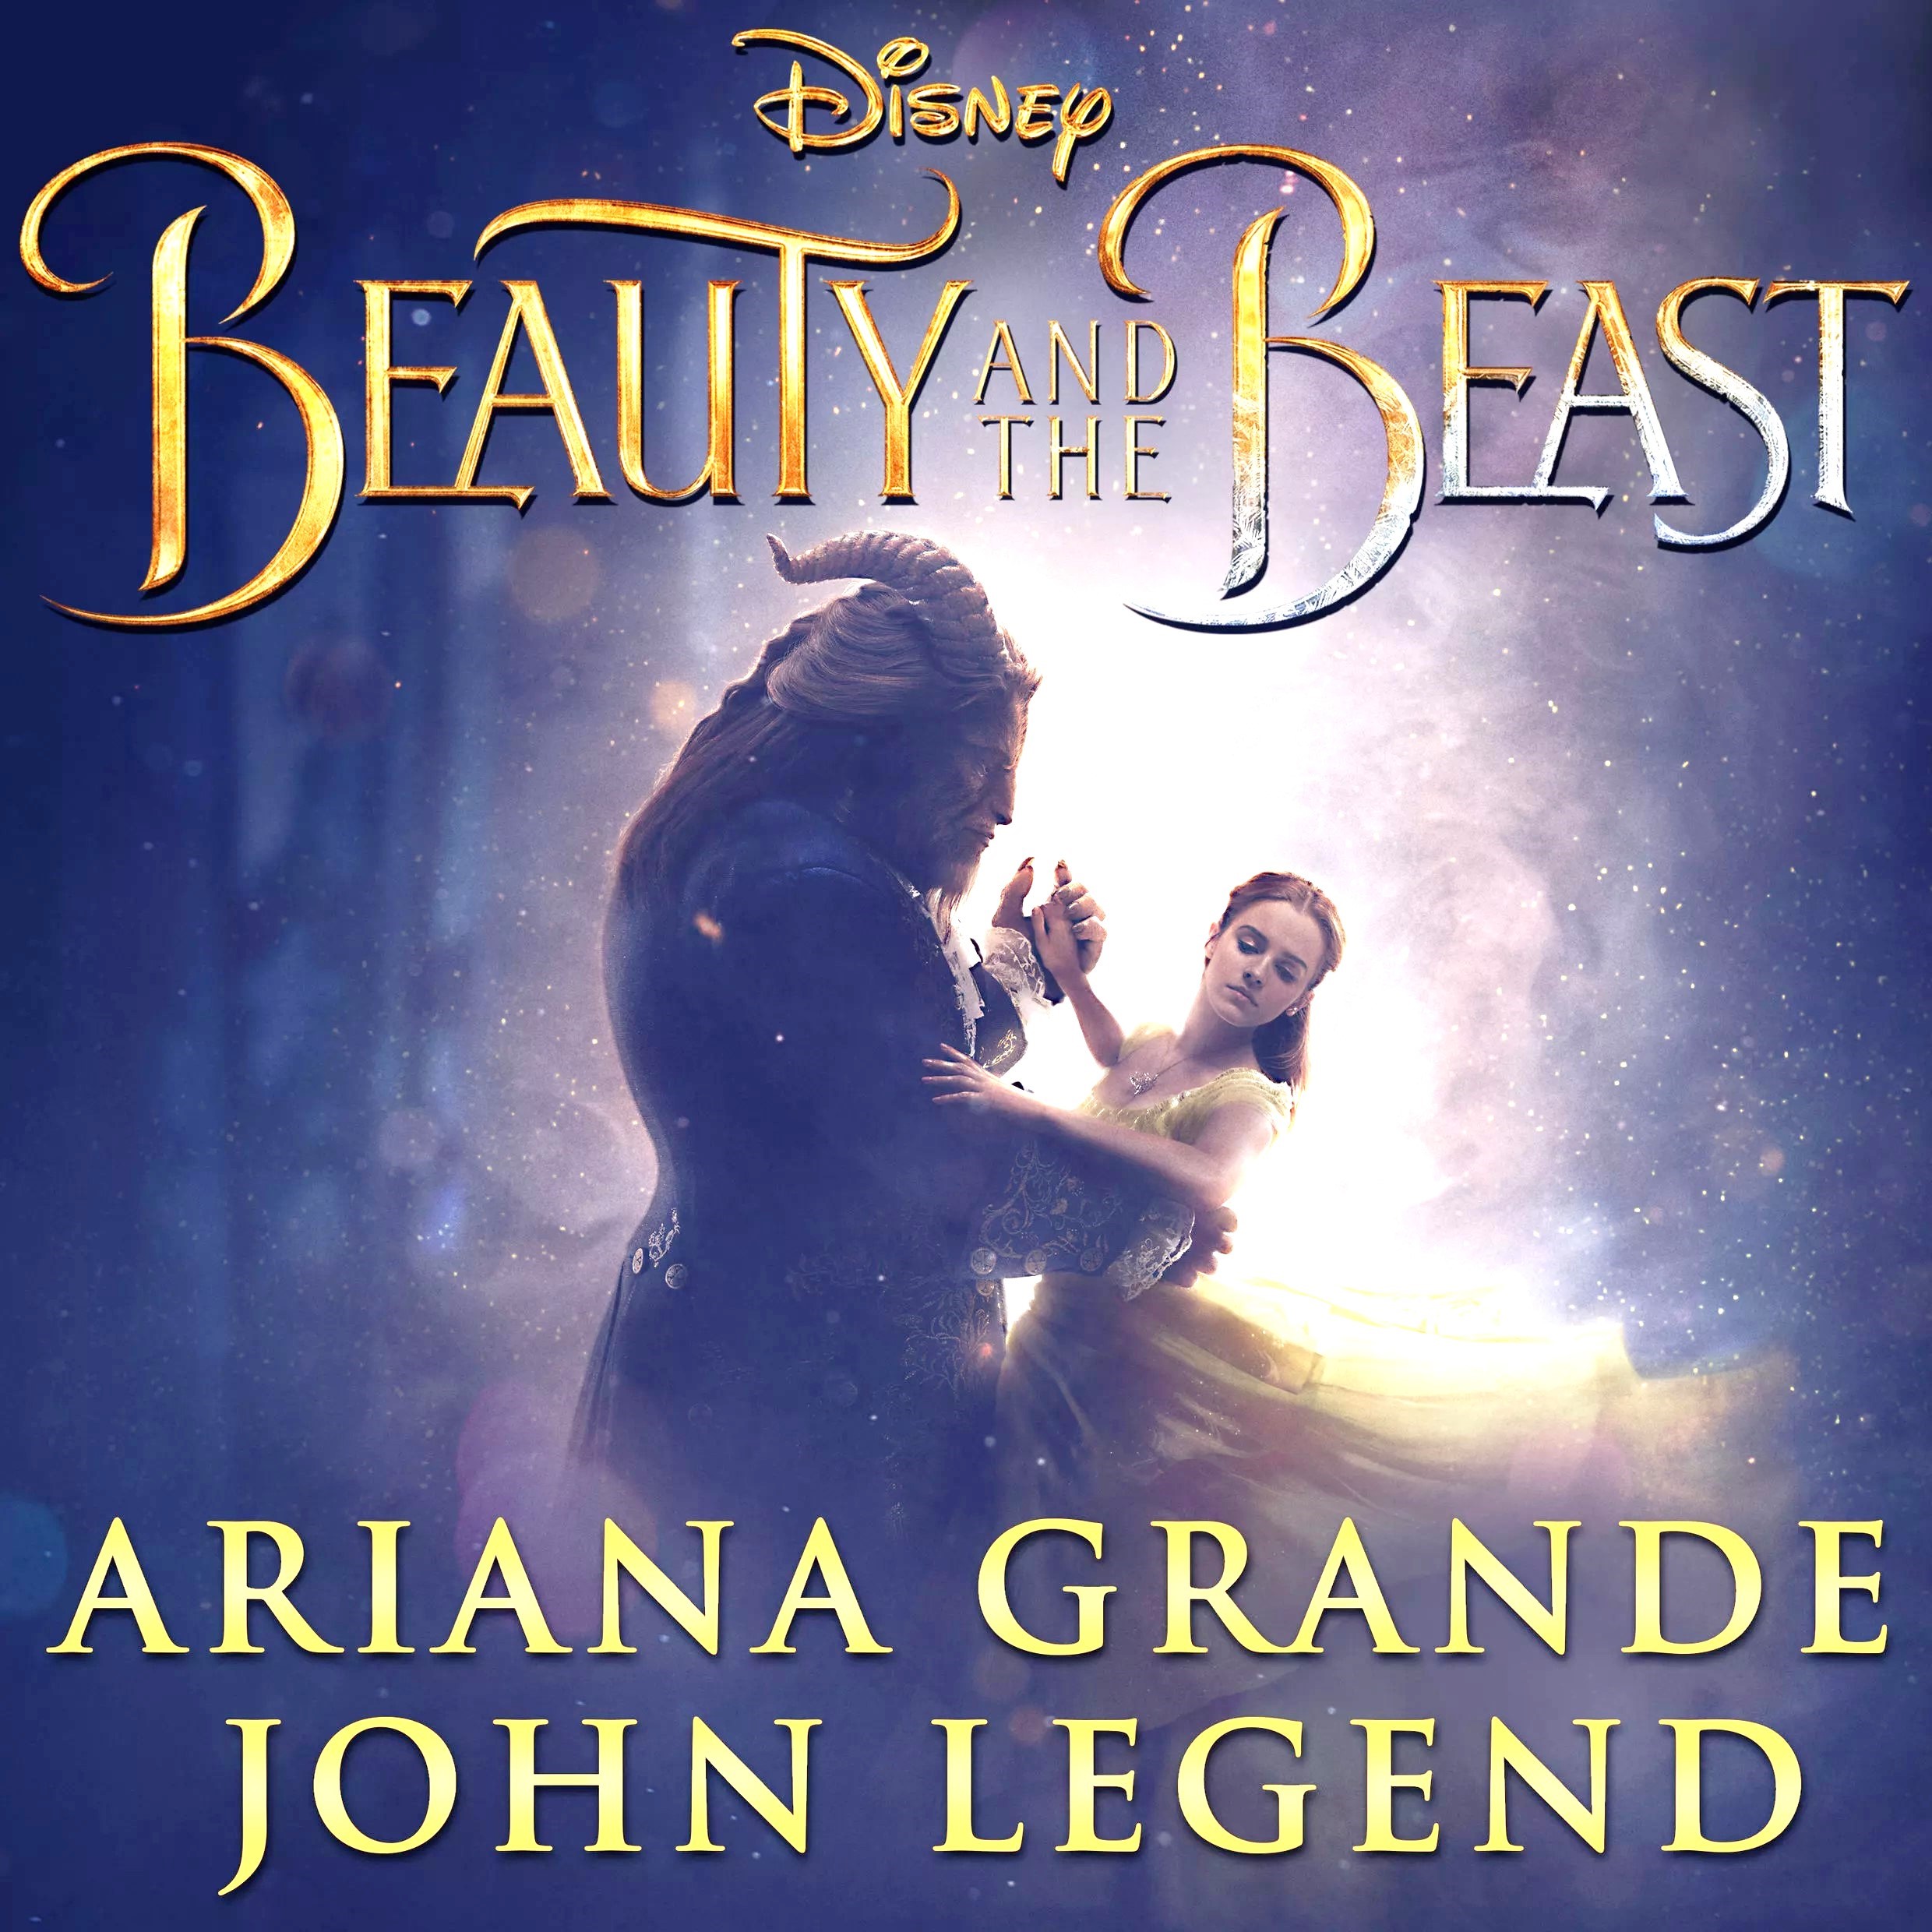 Ariana Grande featuring John Legend — Beauty And The Beast cover artwork